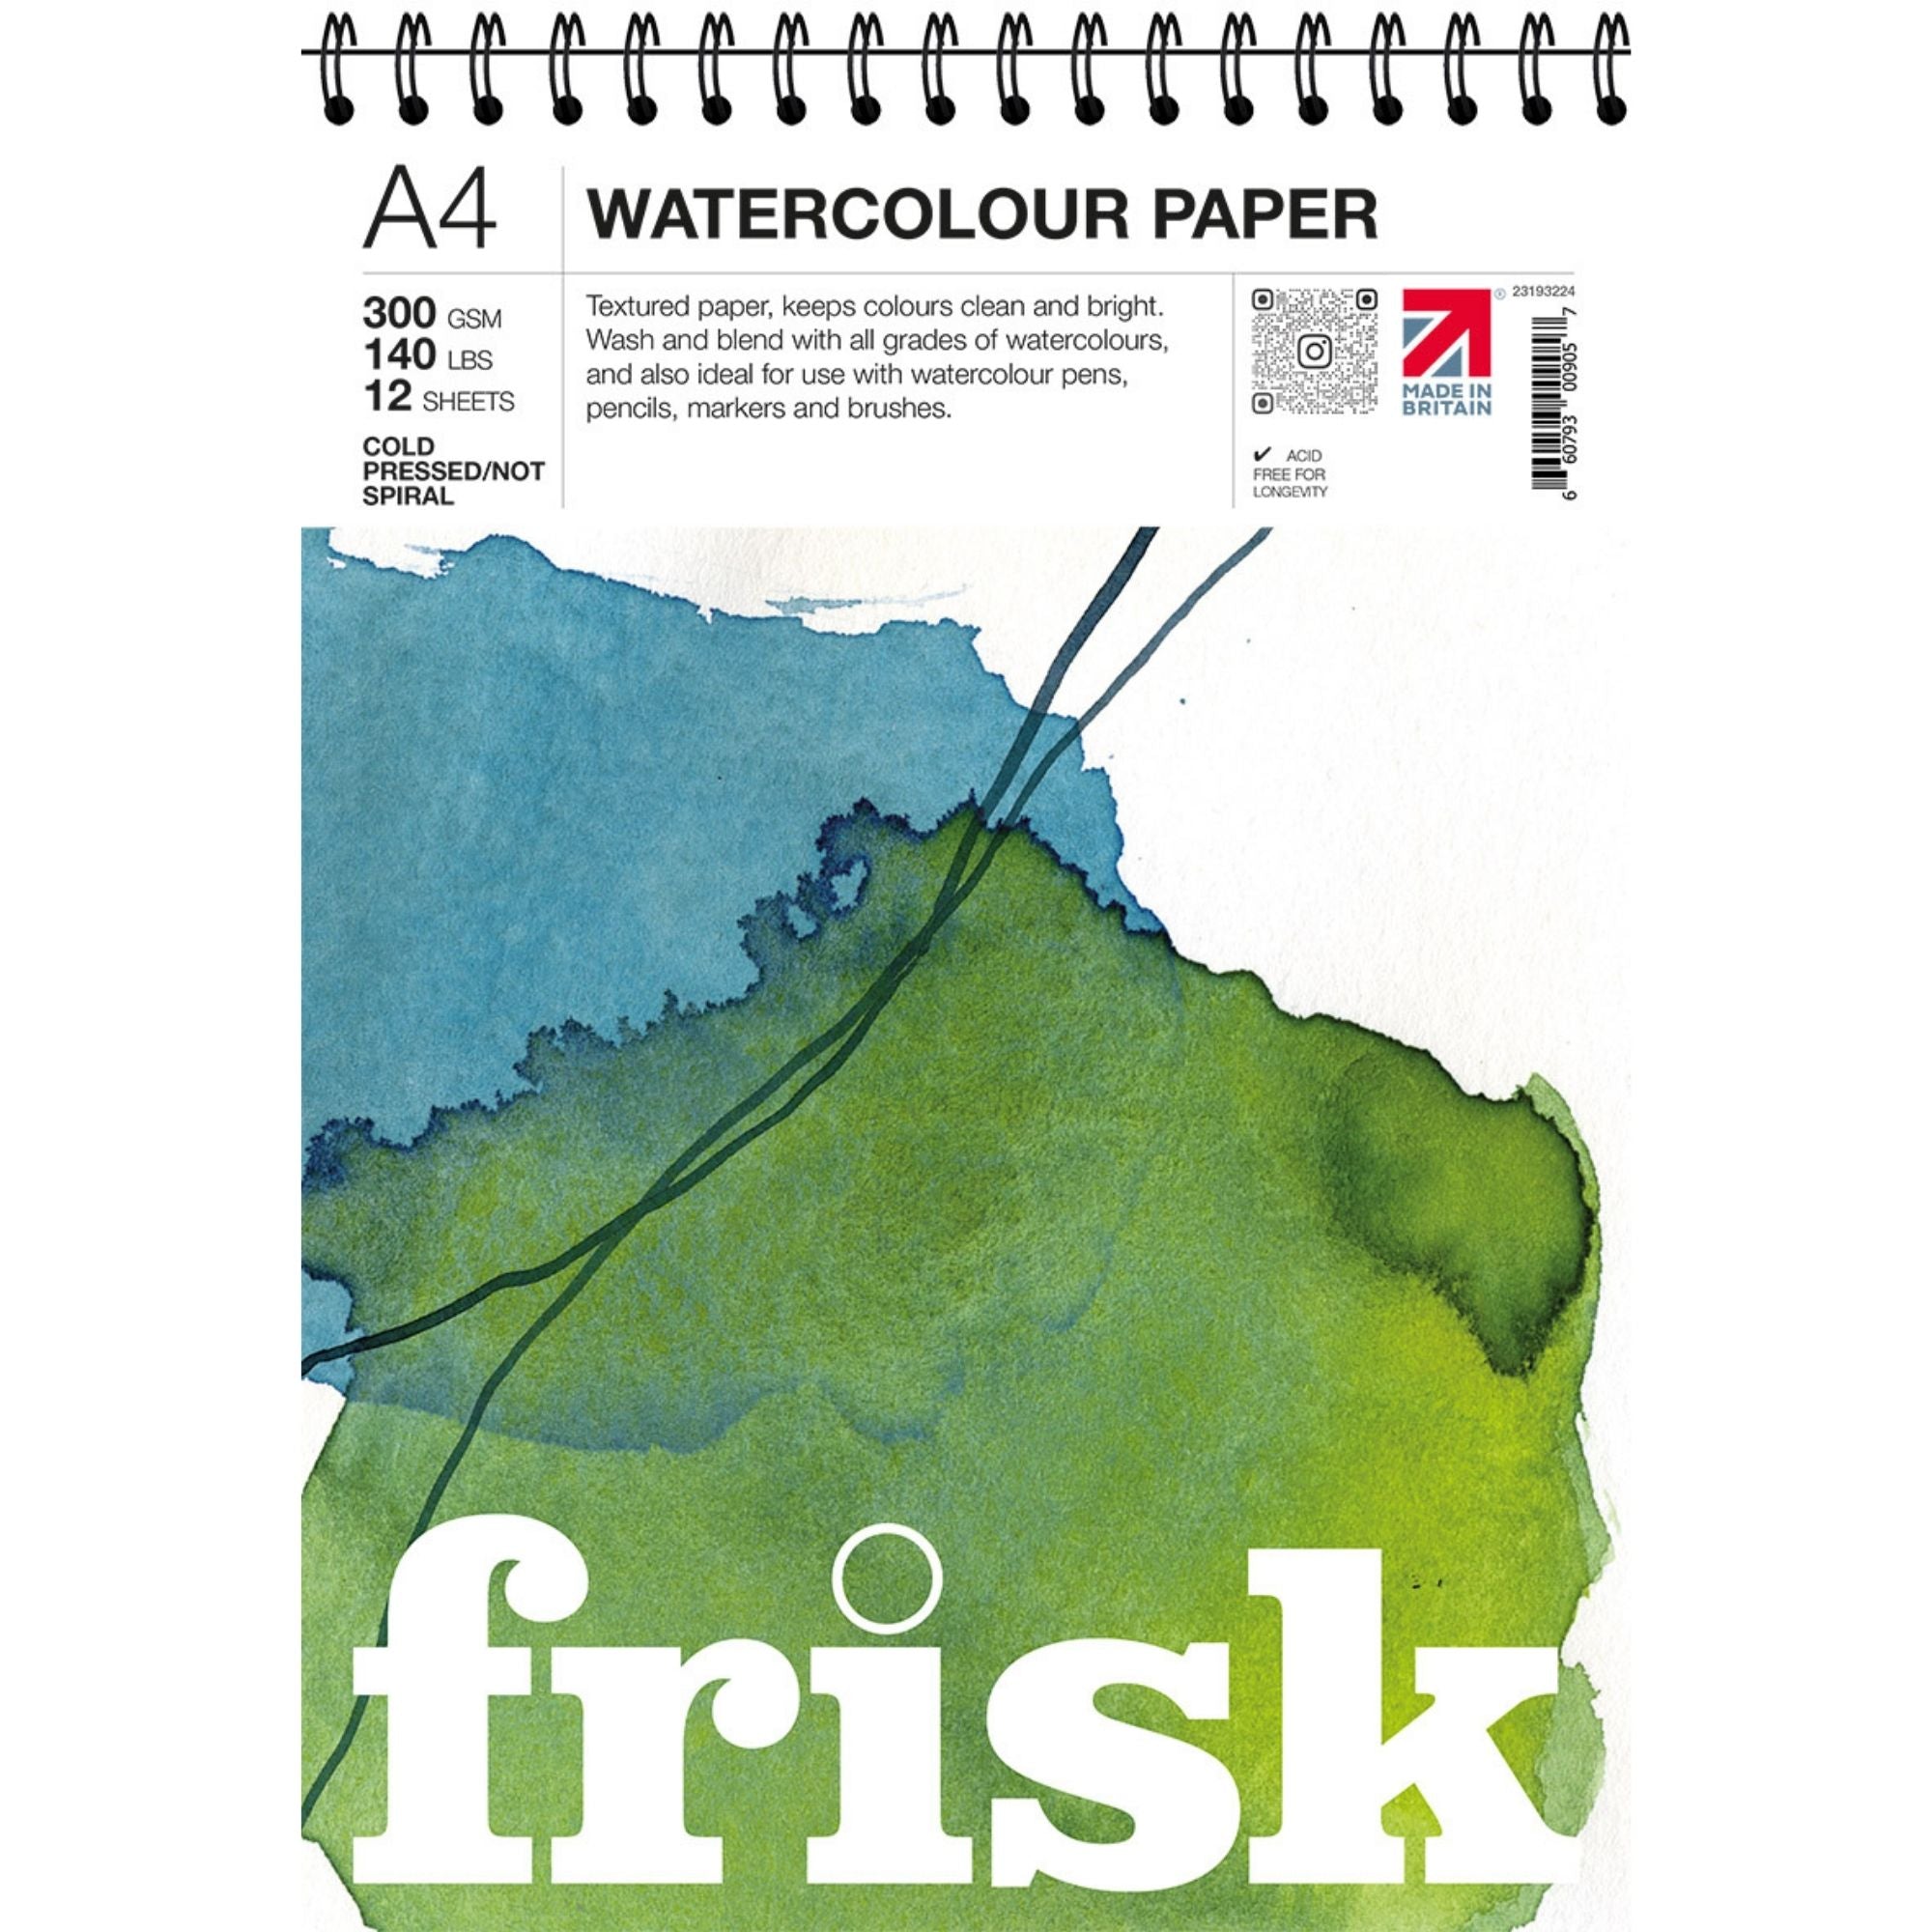 Frisk Watercolour Cold Pressed/ Not Paper Spiral Pad - 300gsm - 12 Sheets